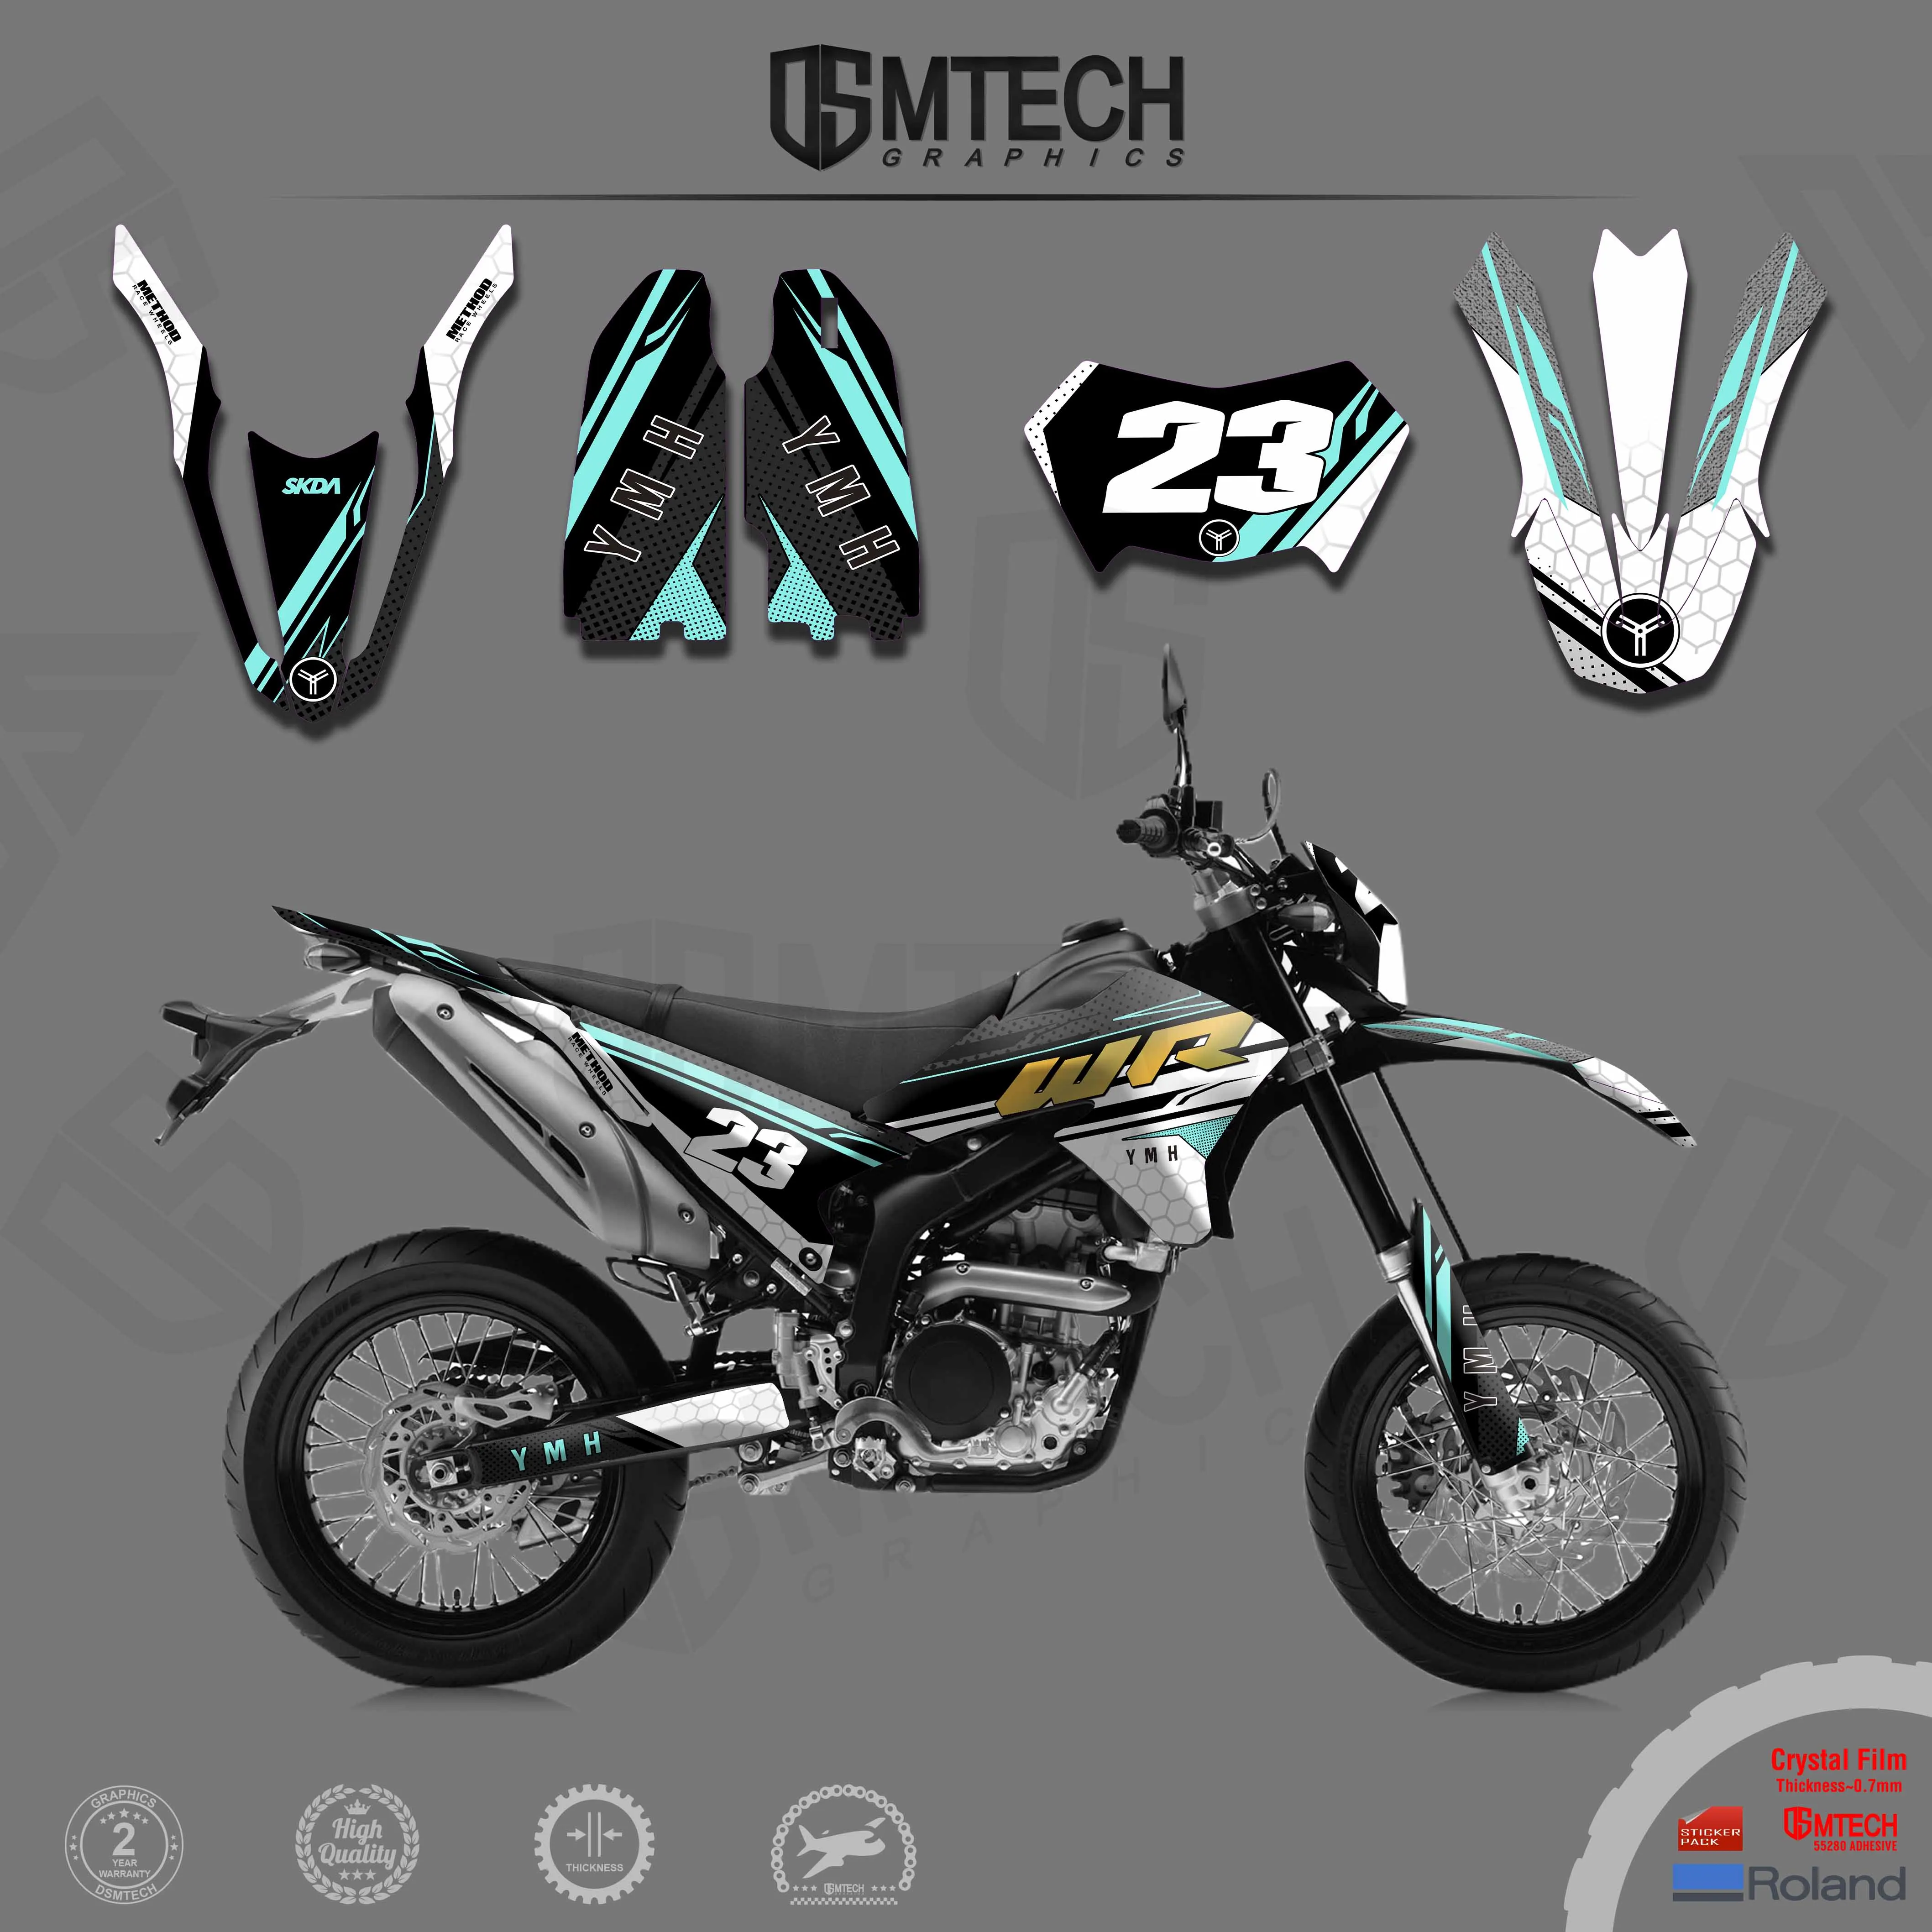 dsmtech-motorcycle-team-backgrounds-graphics-stickers-decals-kits-for-yamaha-2008-2009-2010-2011-2012-2013-2014-20-wr250-r-001